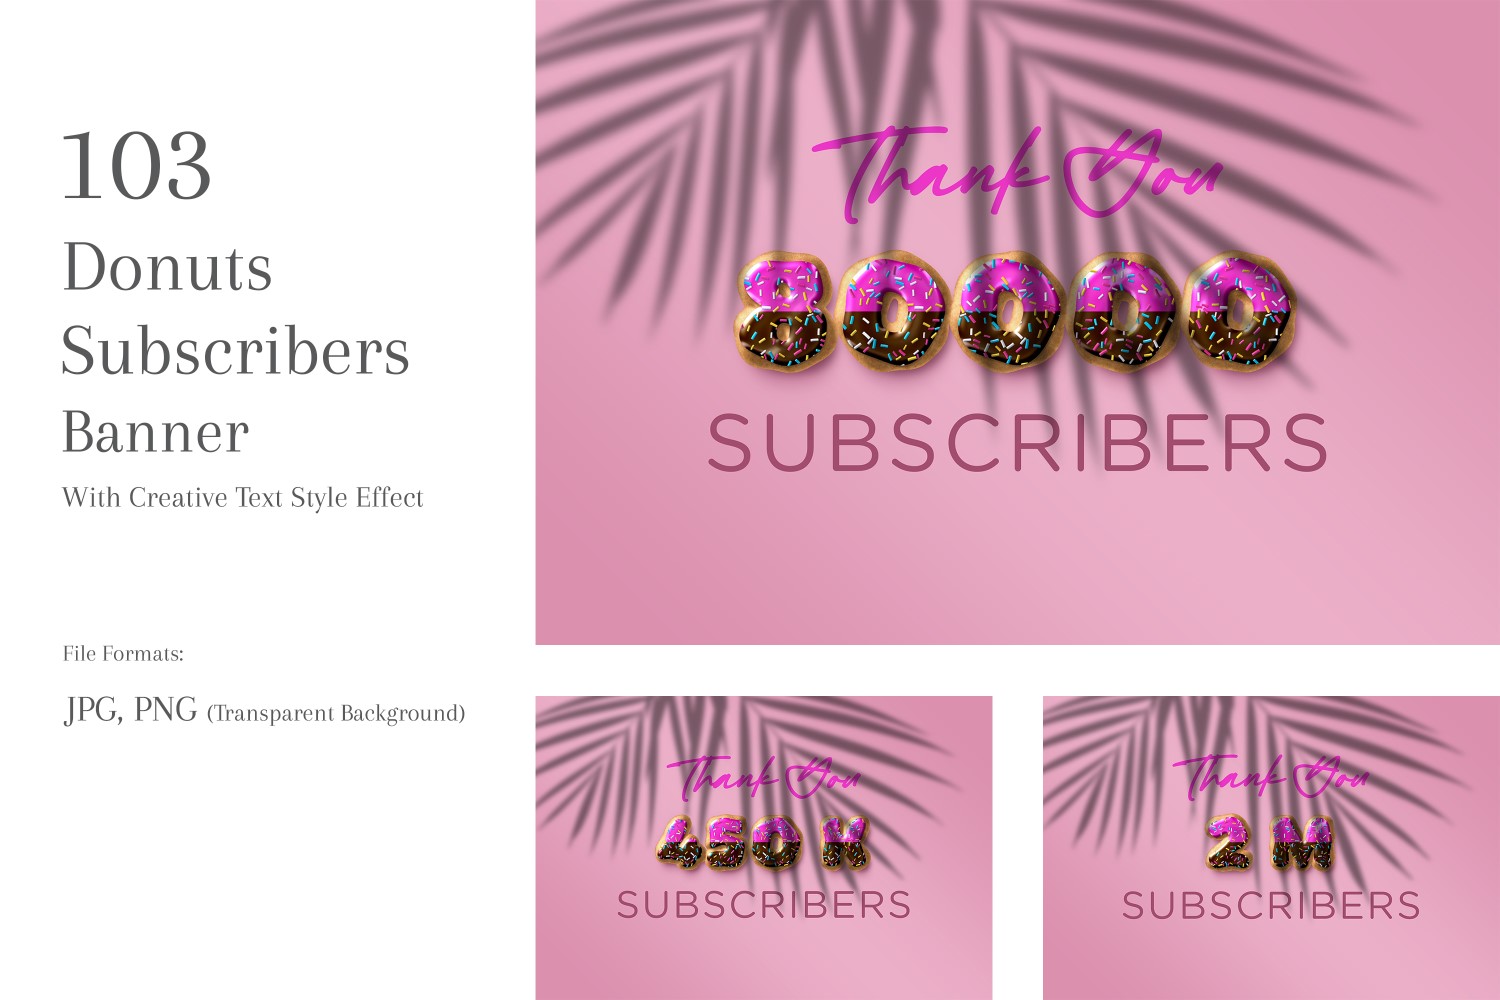 Donuts Subscribers Banners Design Set 134